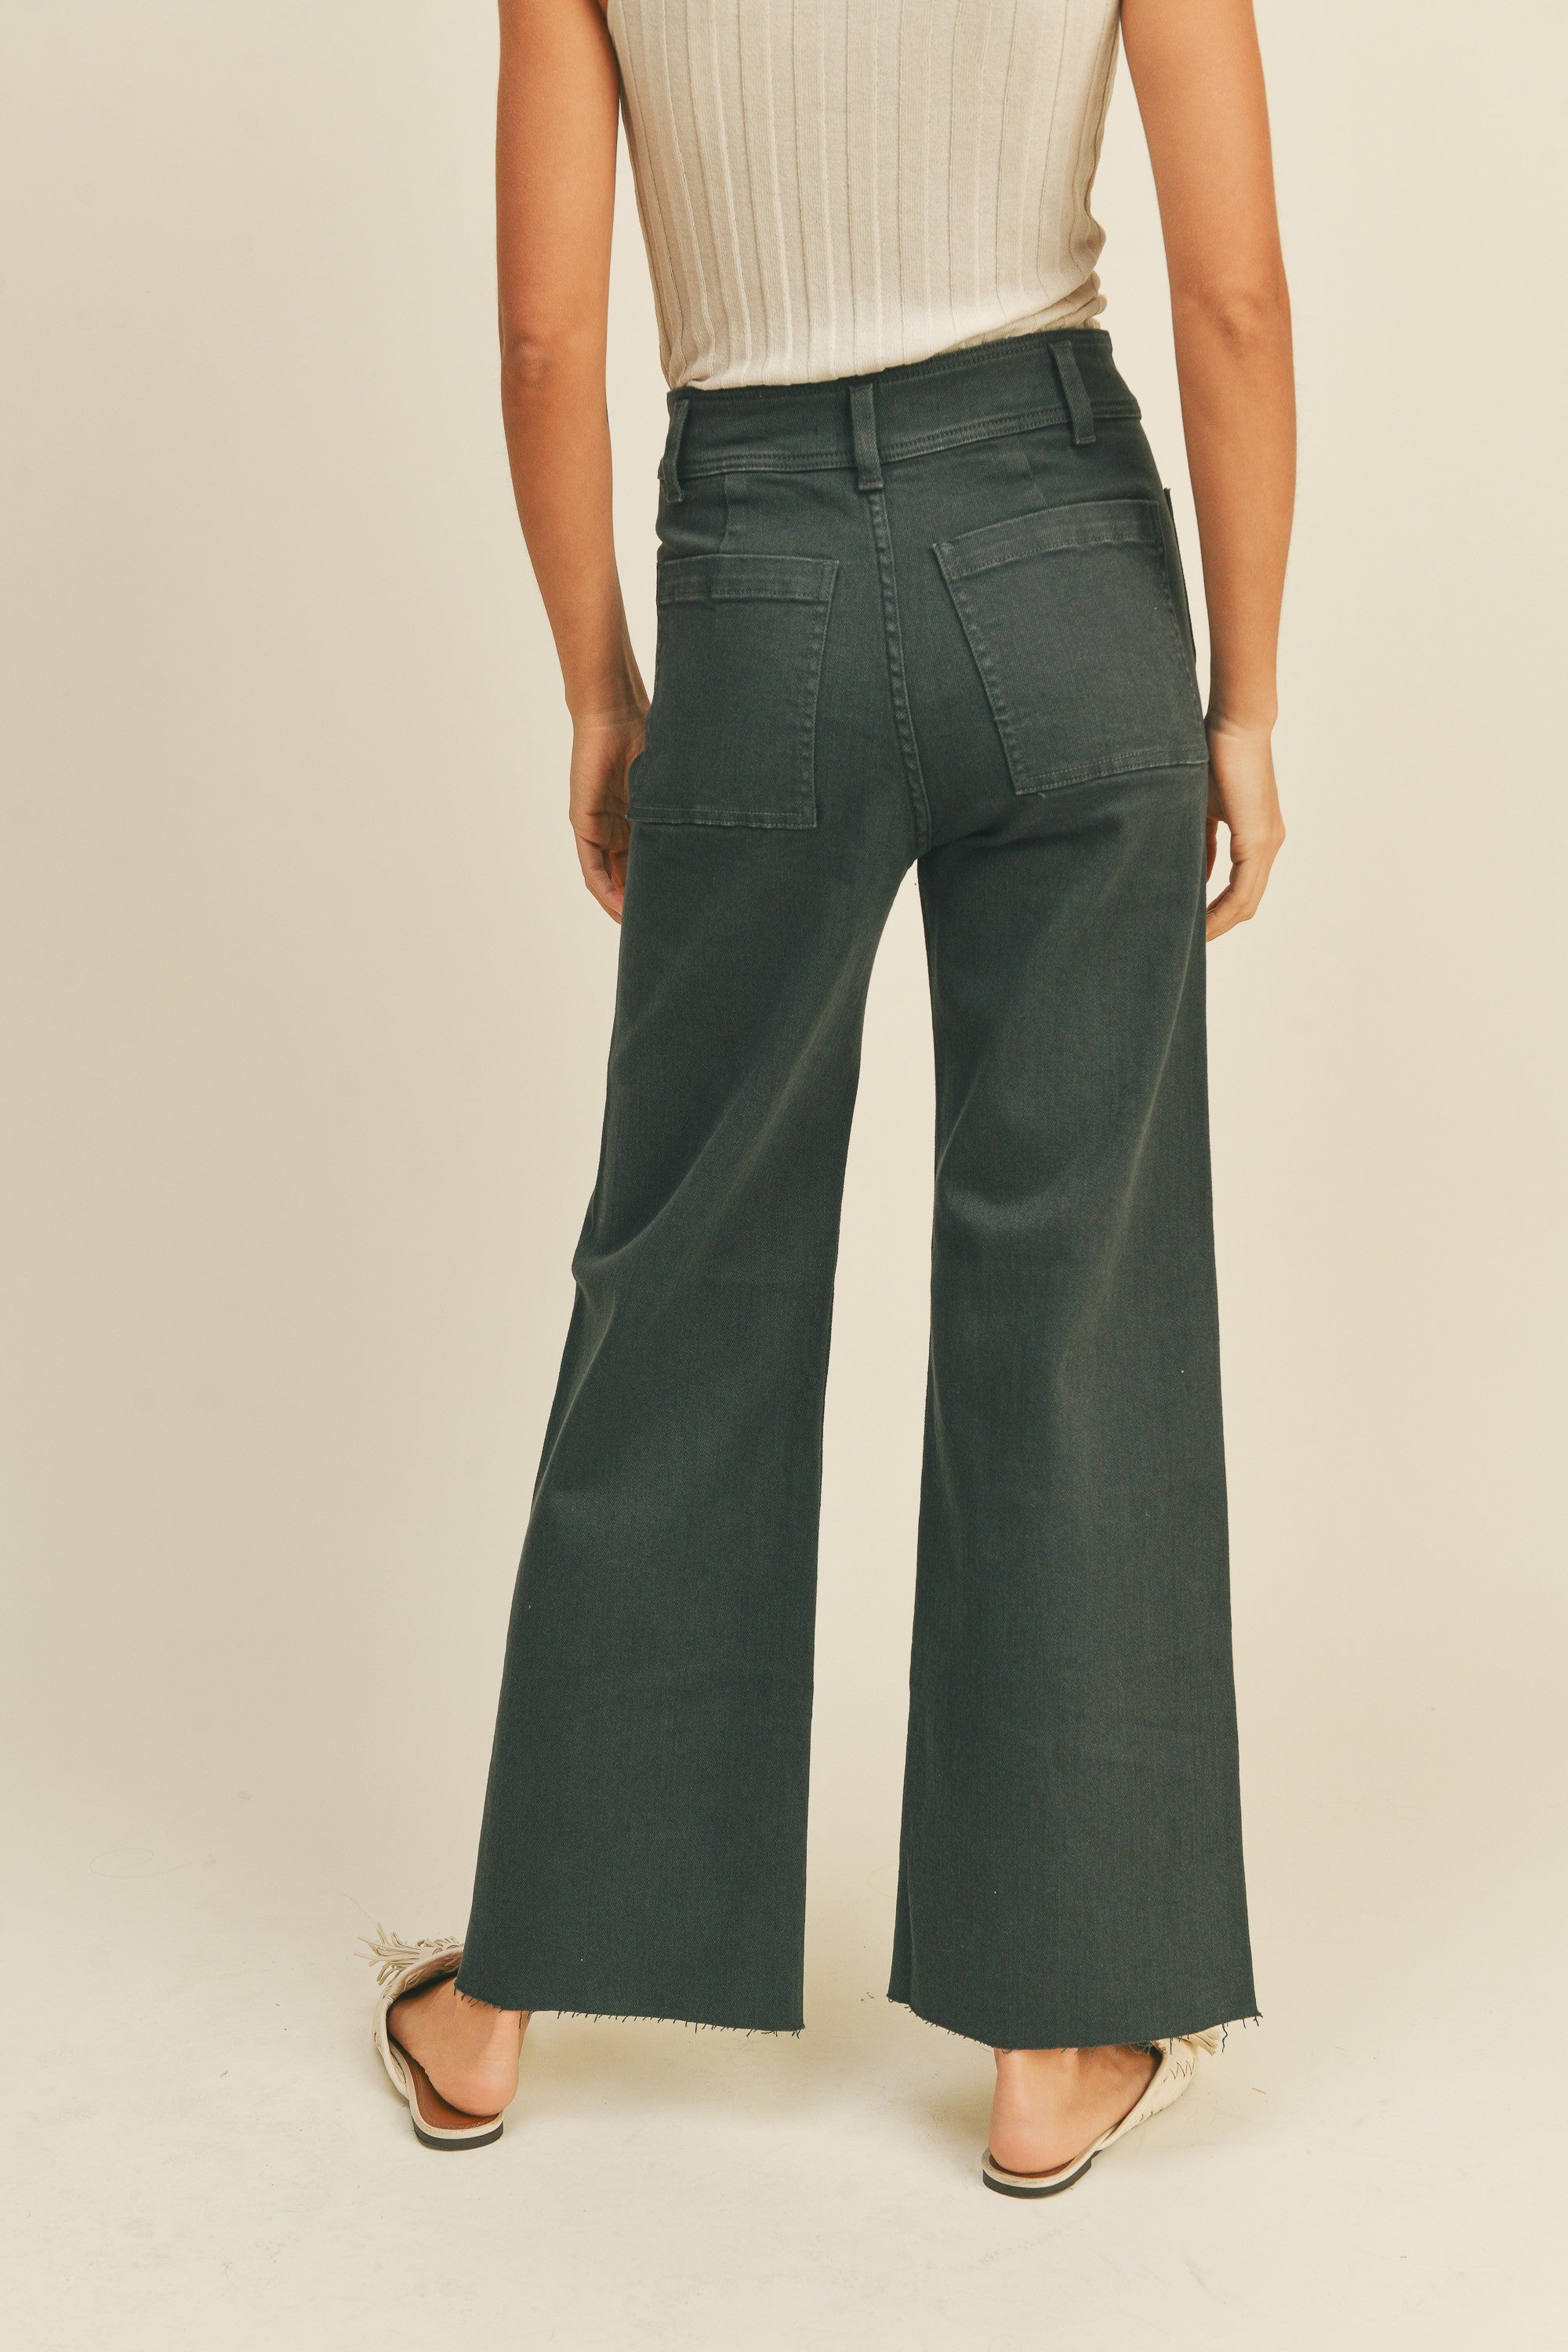 Straight Wide Leg Pants - Front Pockets